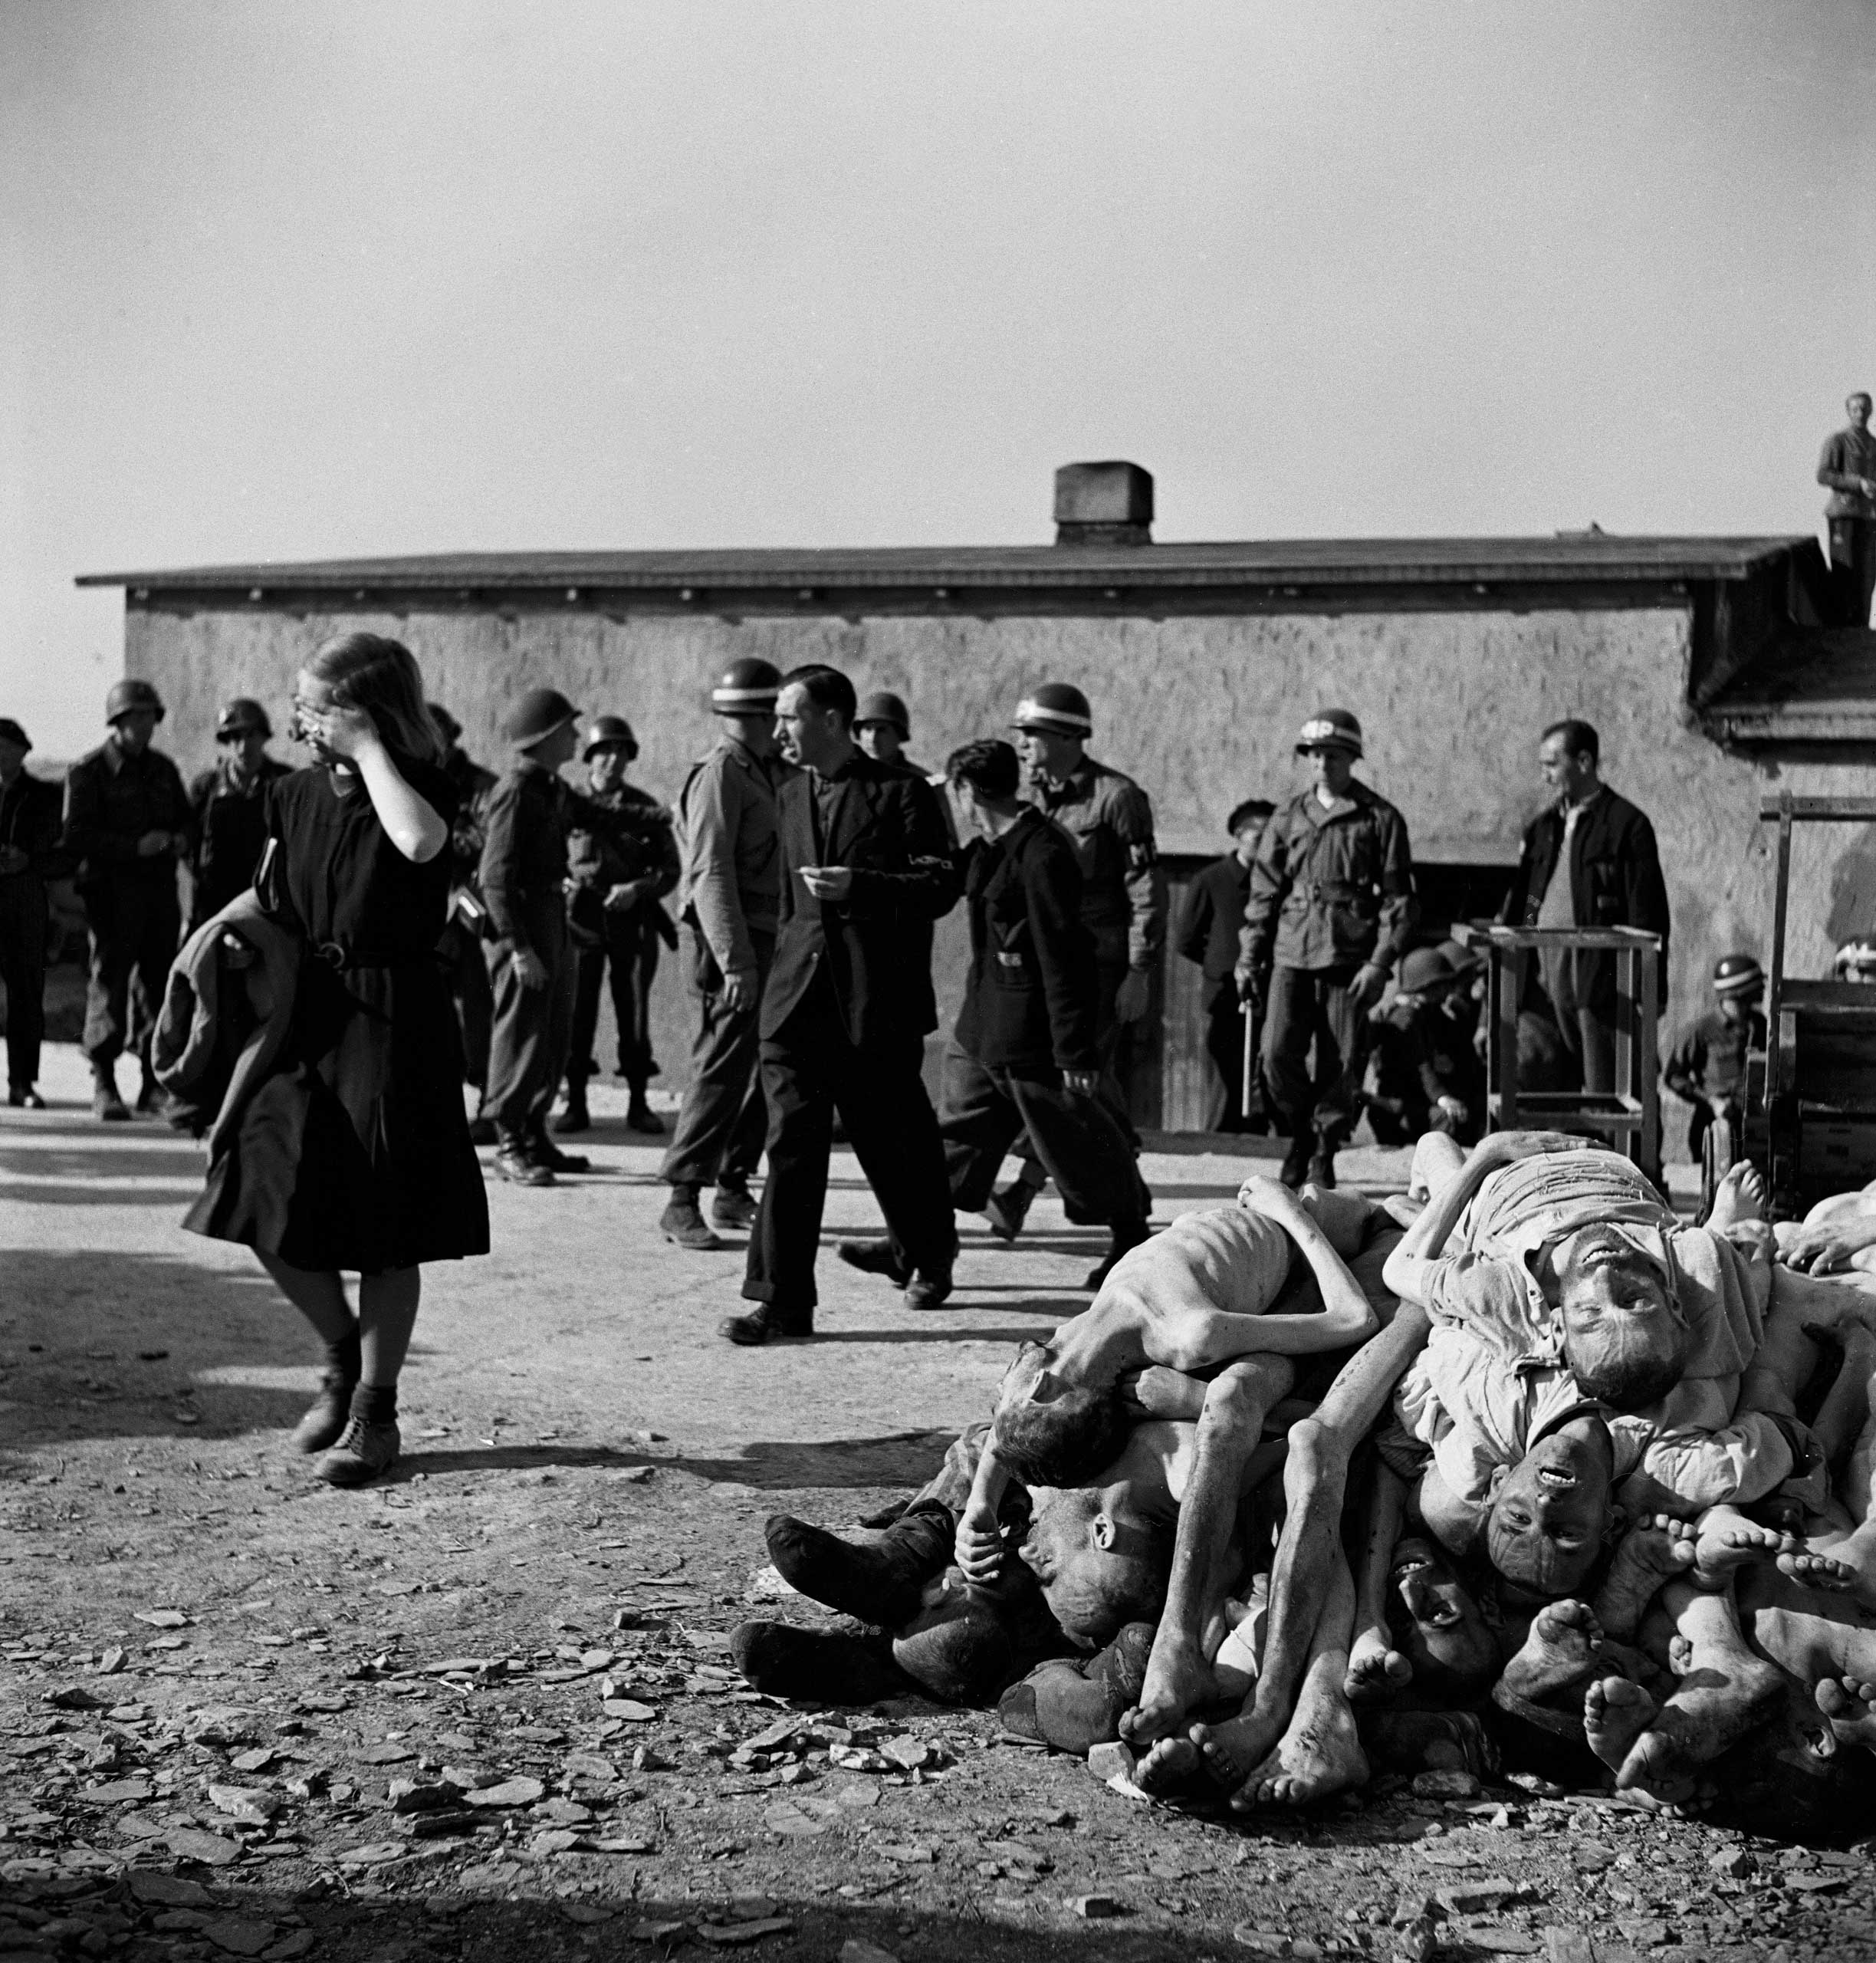 Not published in LIFE. German civilians are forced by American troops to bear witness to Nazi atrocities at Buchenwald concentration camp, mere miles from their own homes, April 1945.